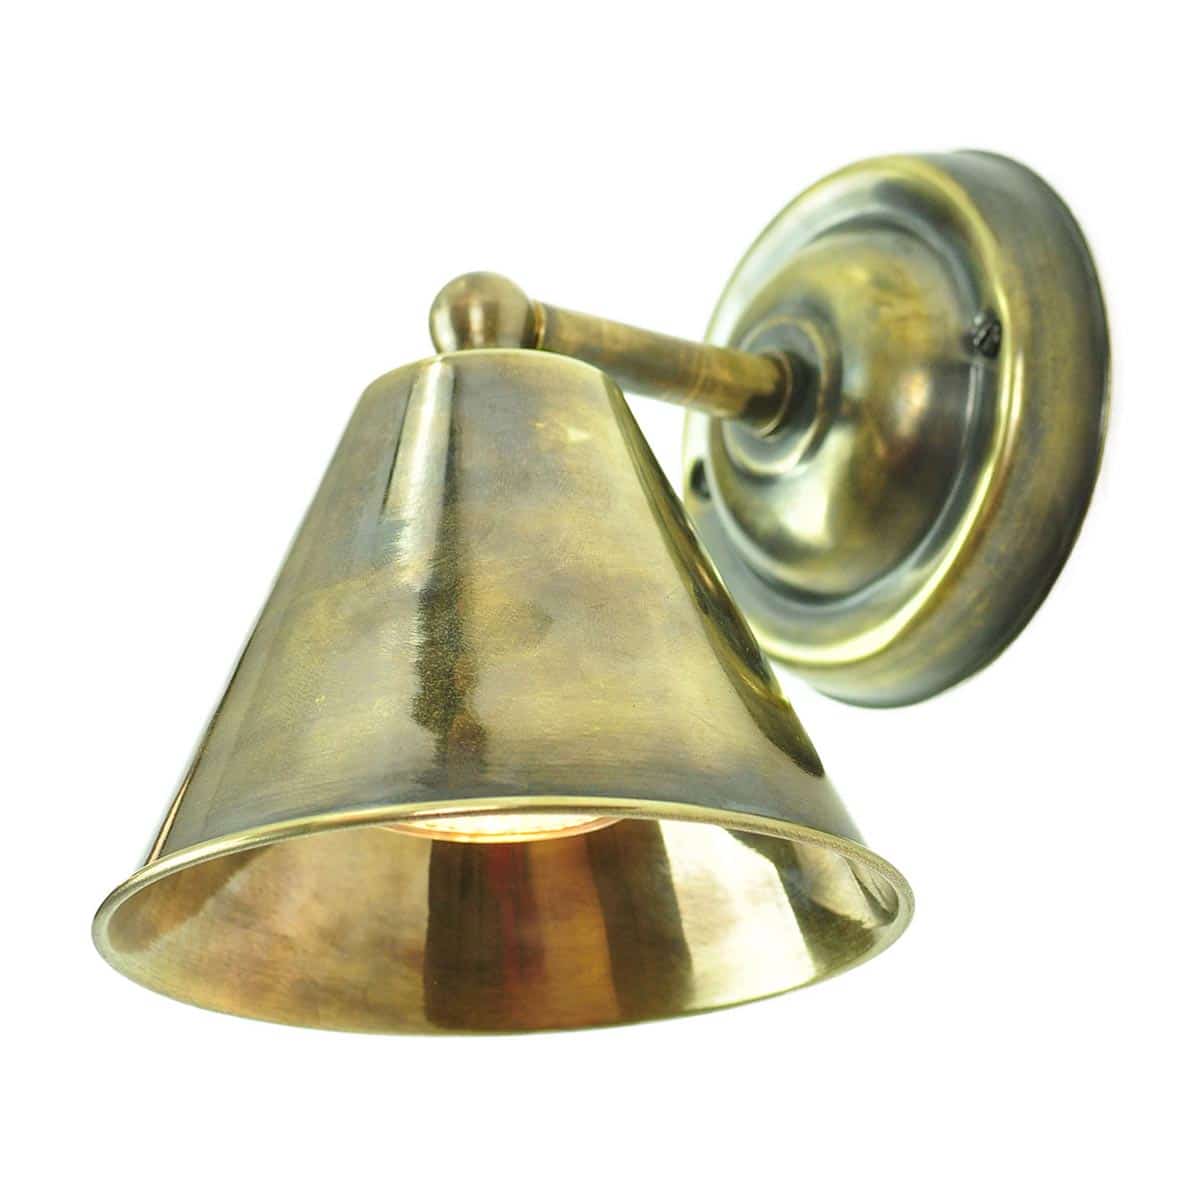 Map Room Nautical 1 Lamp Small Wall Light Solid Antique Brass